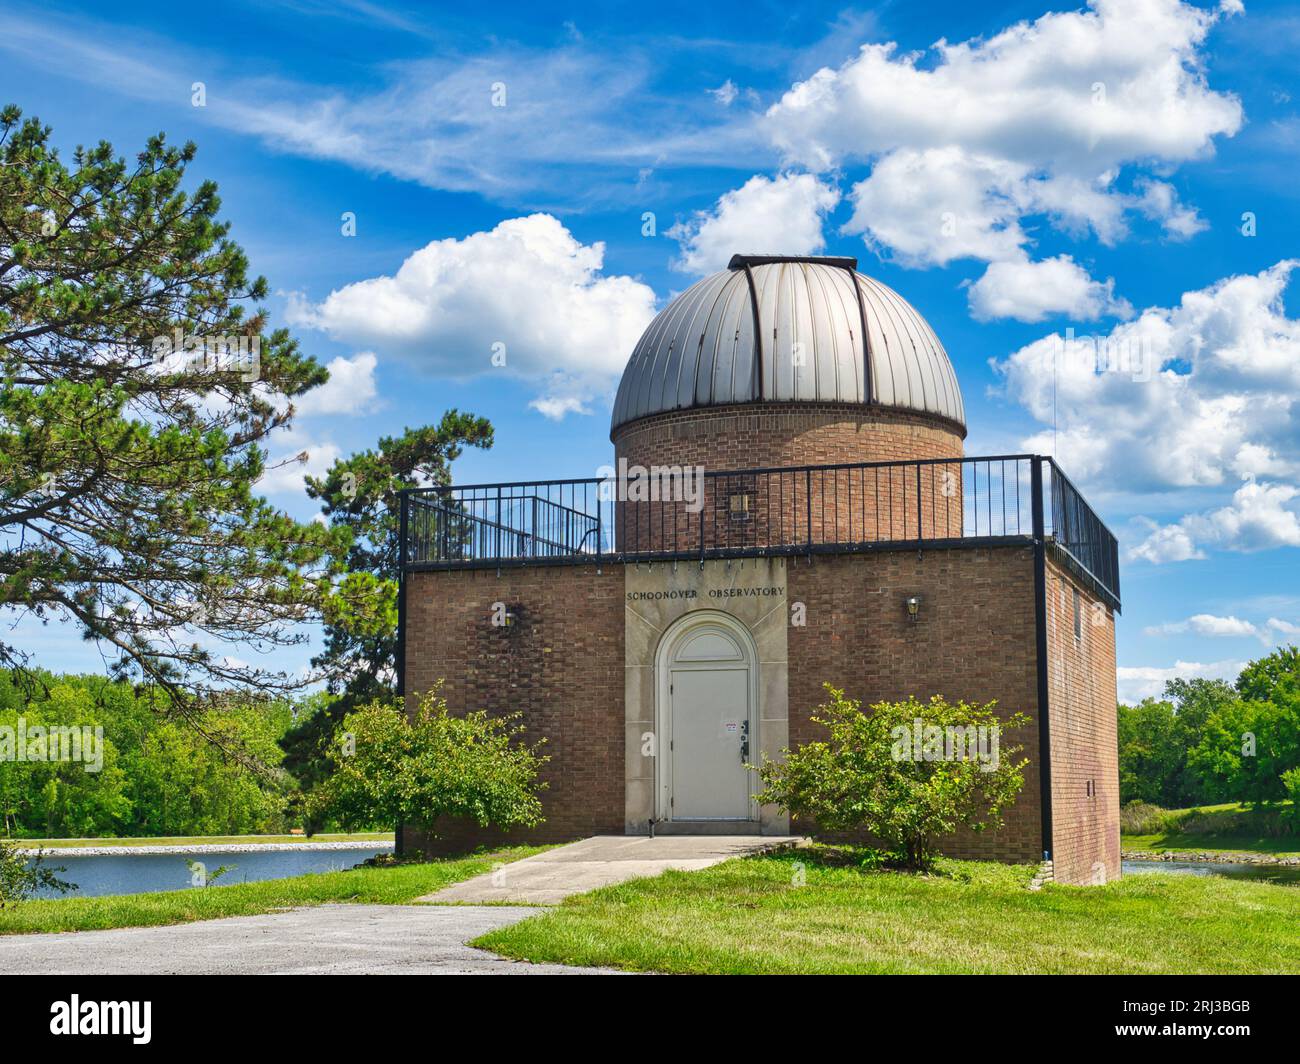 The Schoonover Observatory is located in Schoonover Park, Lima, Ohio Stock Photo